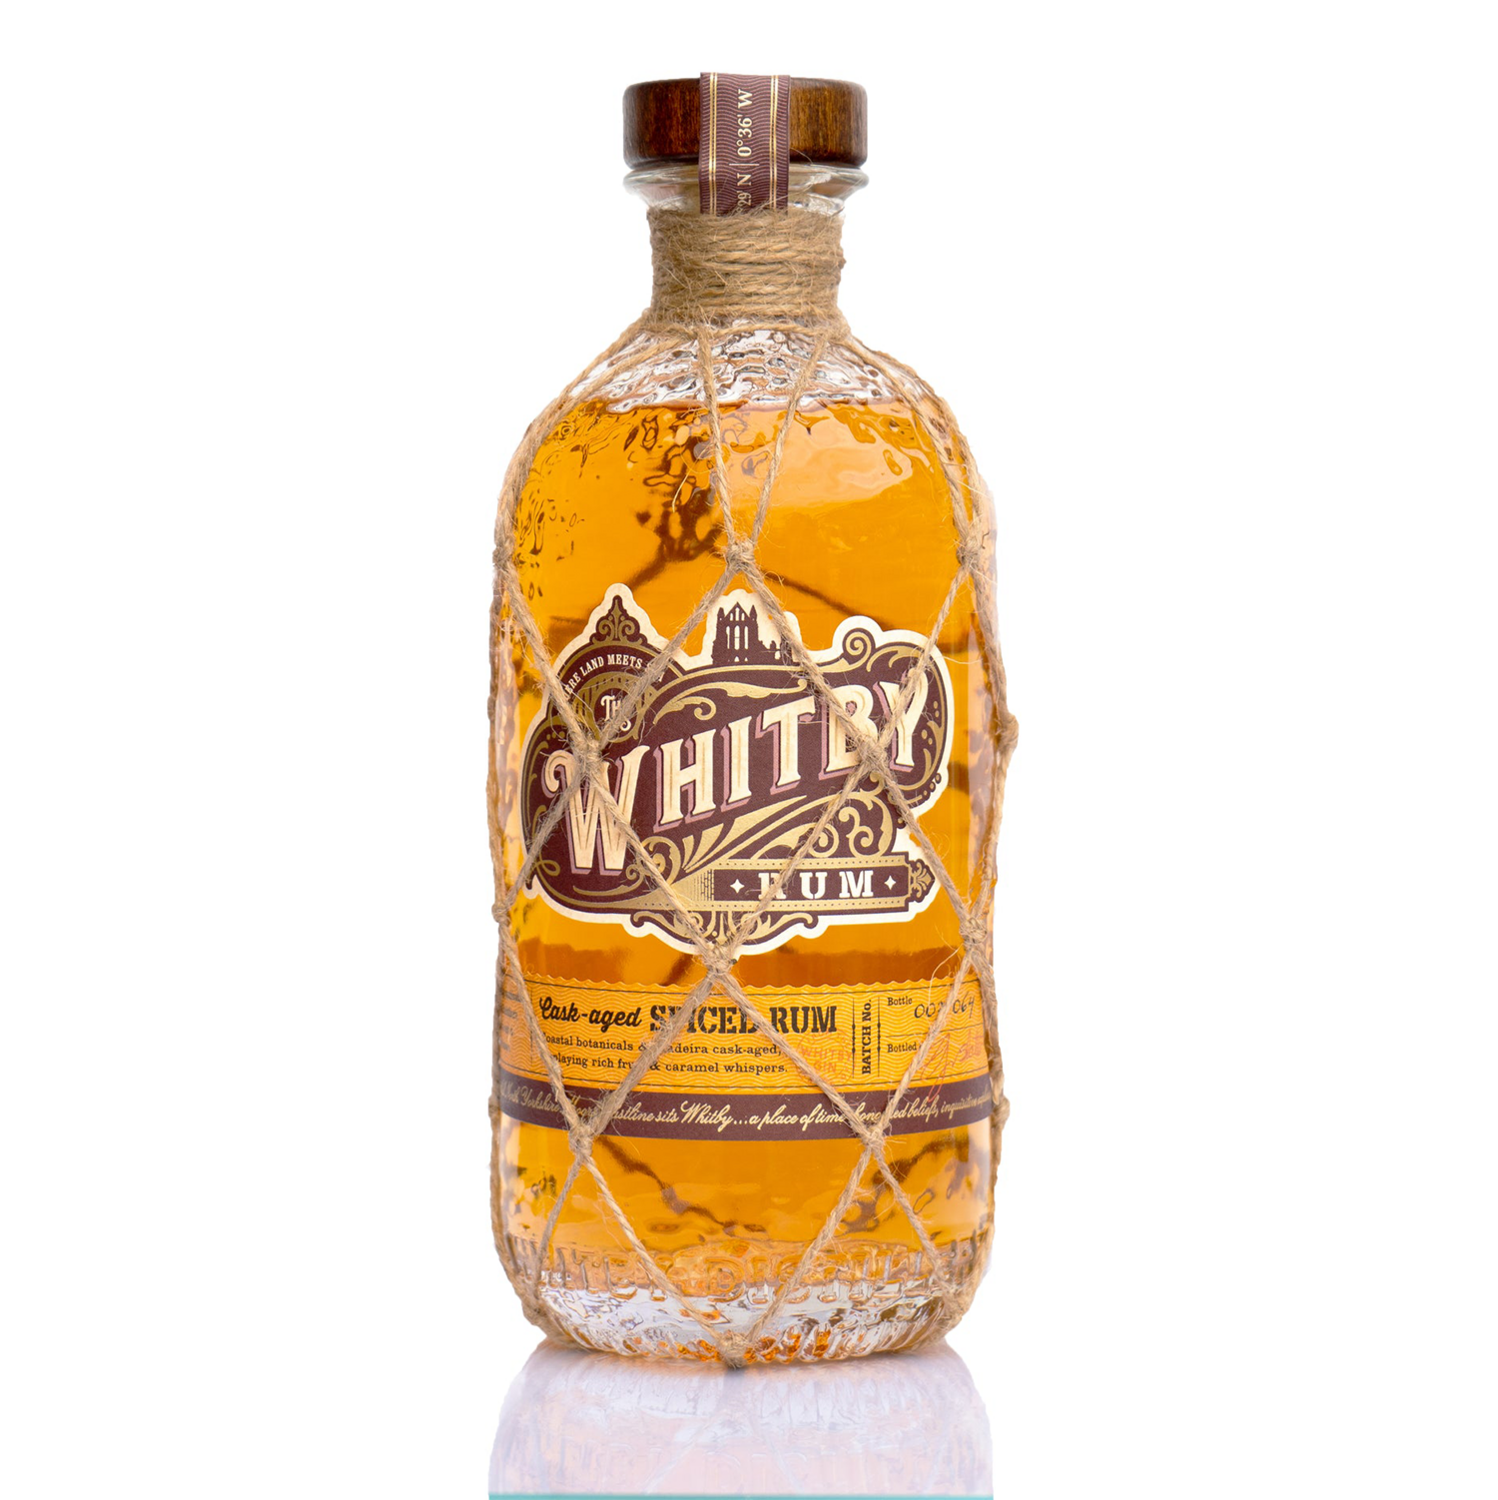 Whitby Rum Cask Aged Spiced Rum